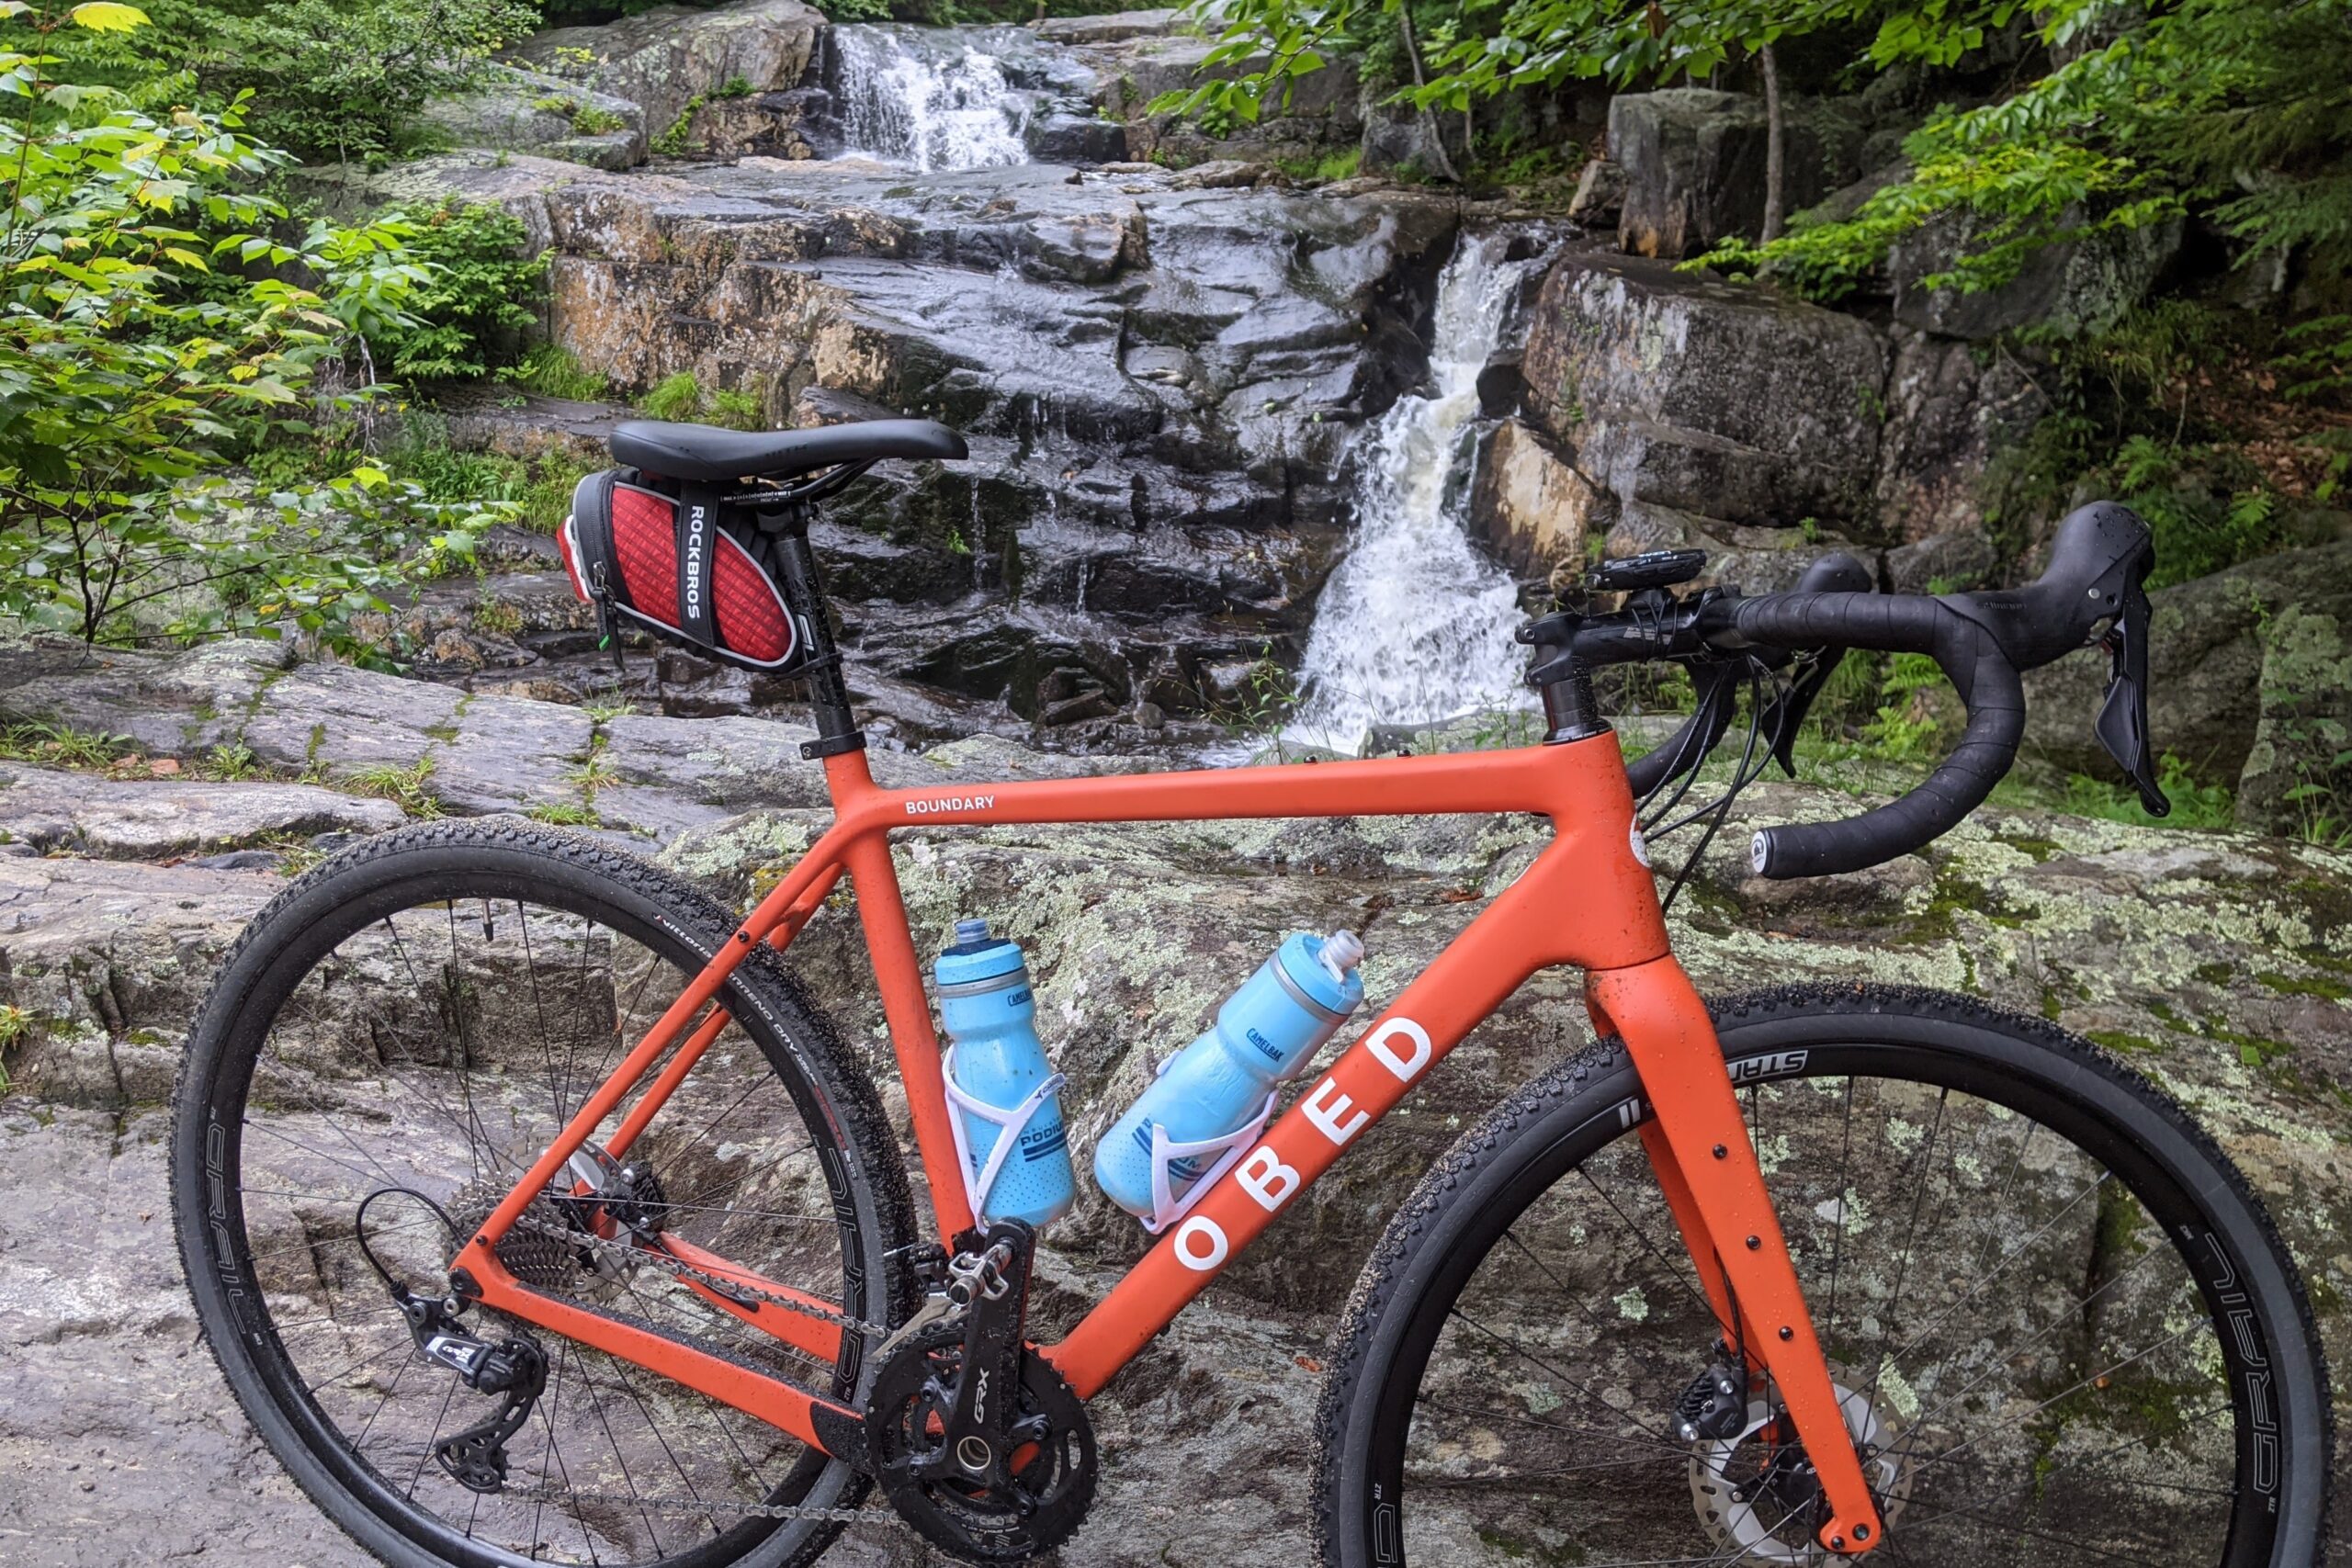 Gravel bike in front of a small waterfall